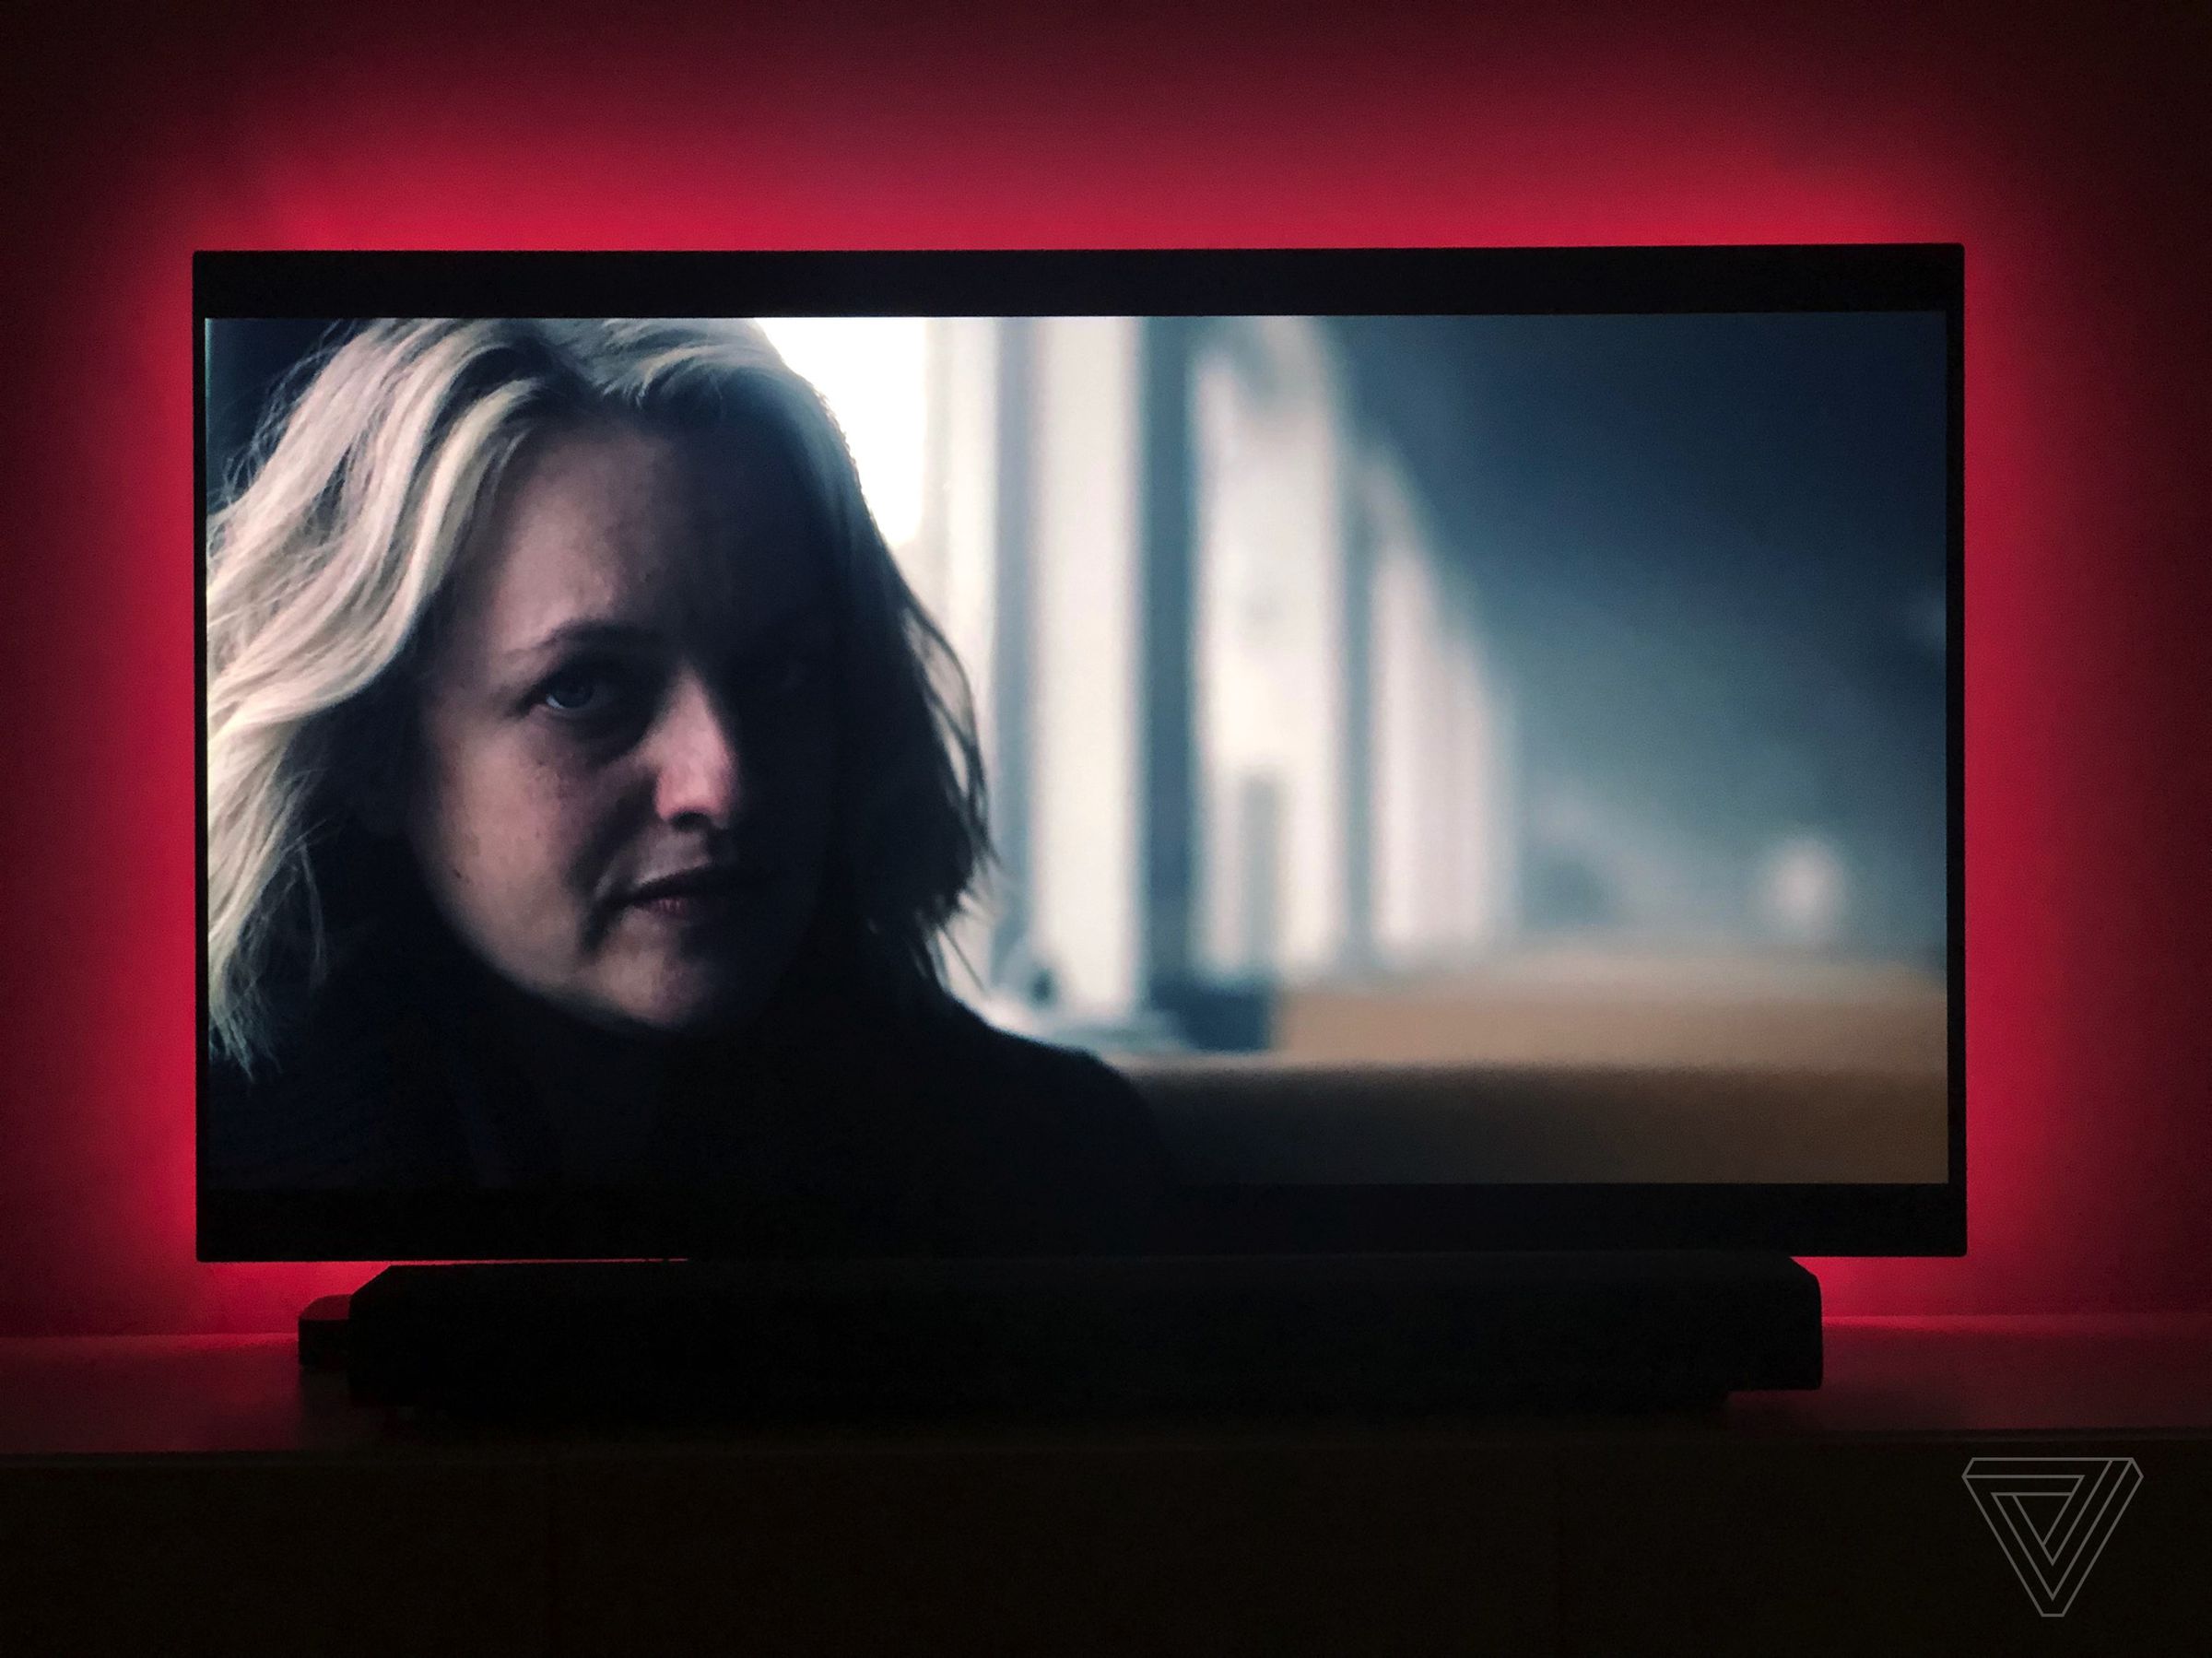 Immersion backlight set to All  / Movie mode makes The Handmaid’s Tale even more dire.